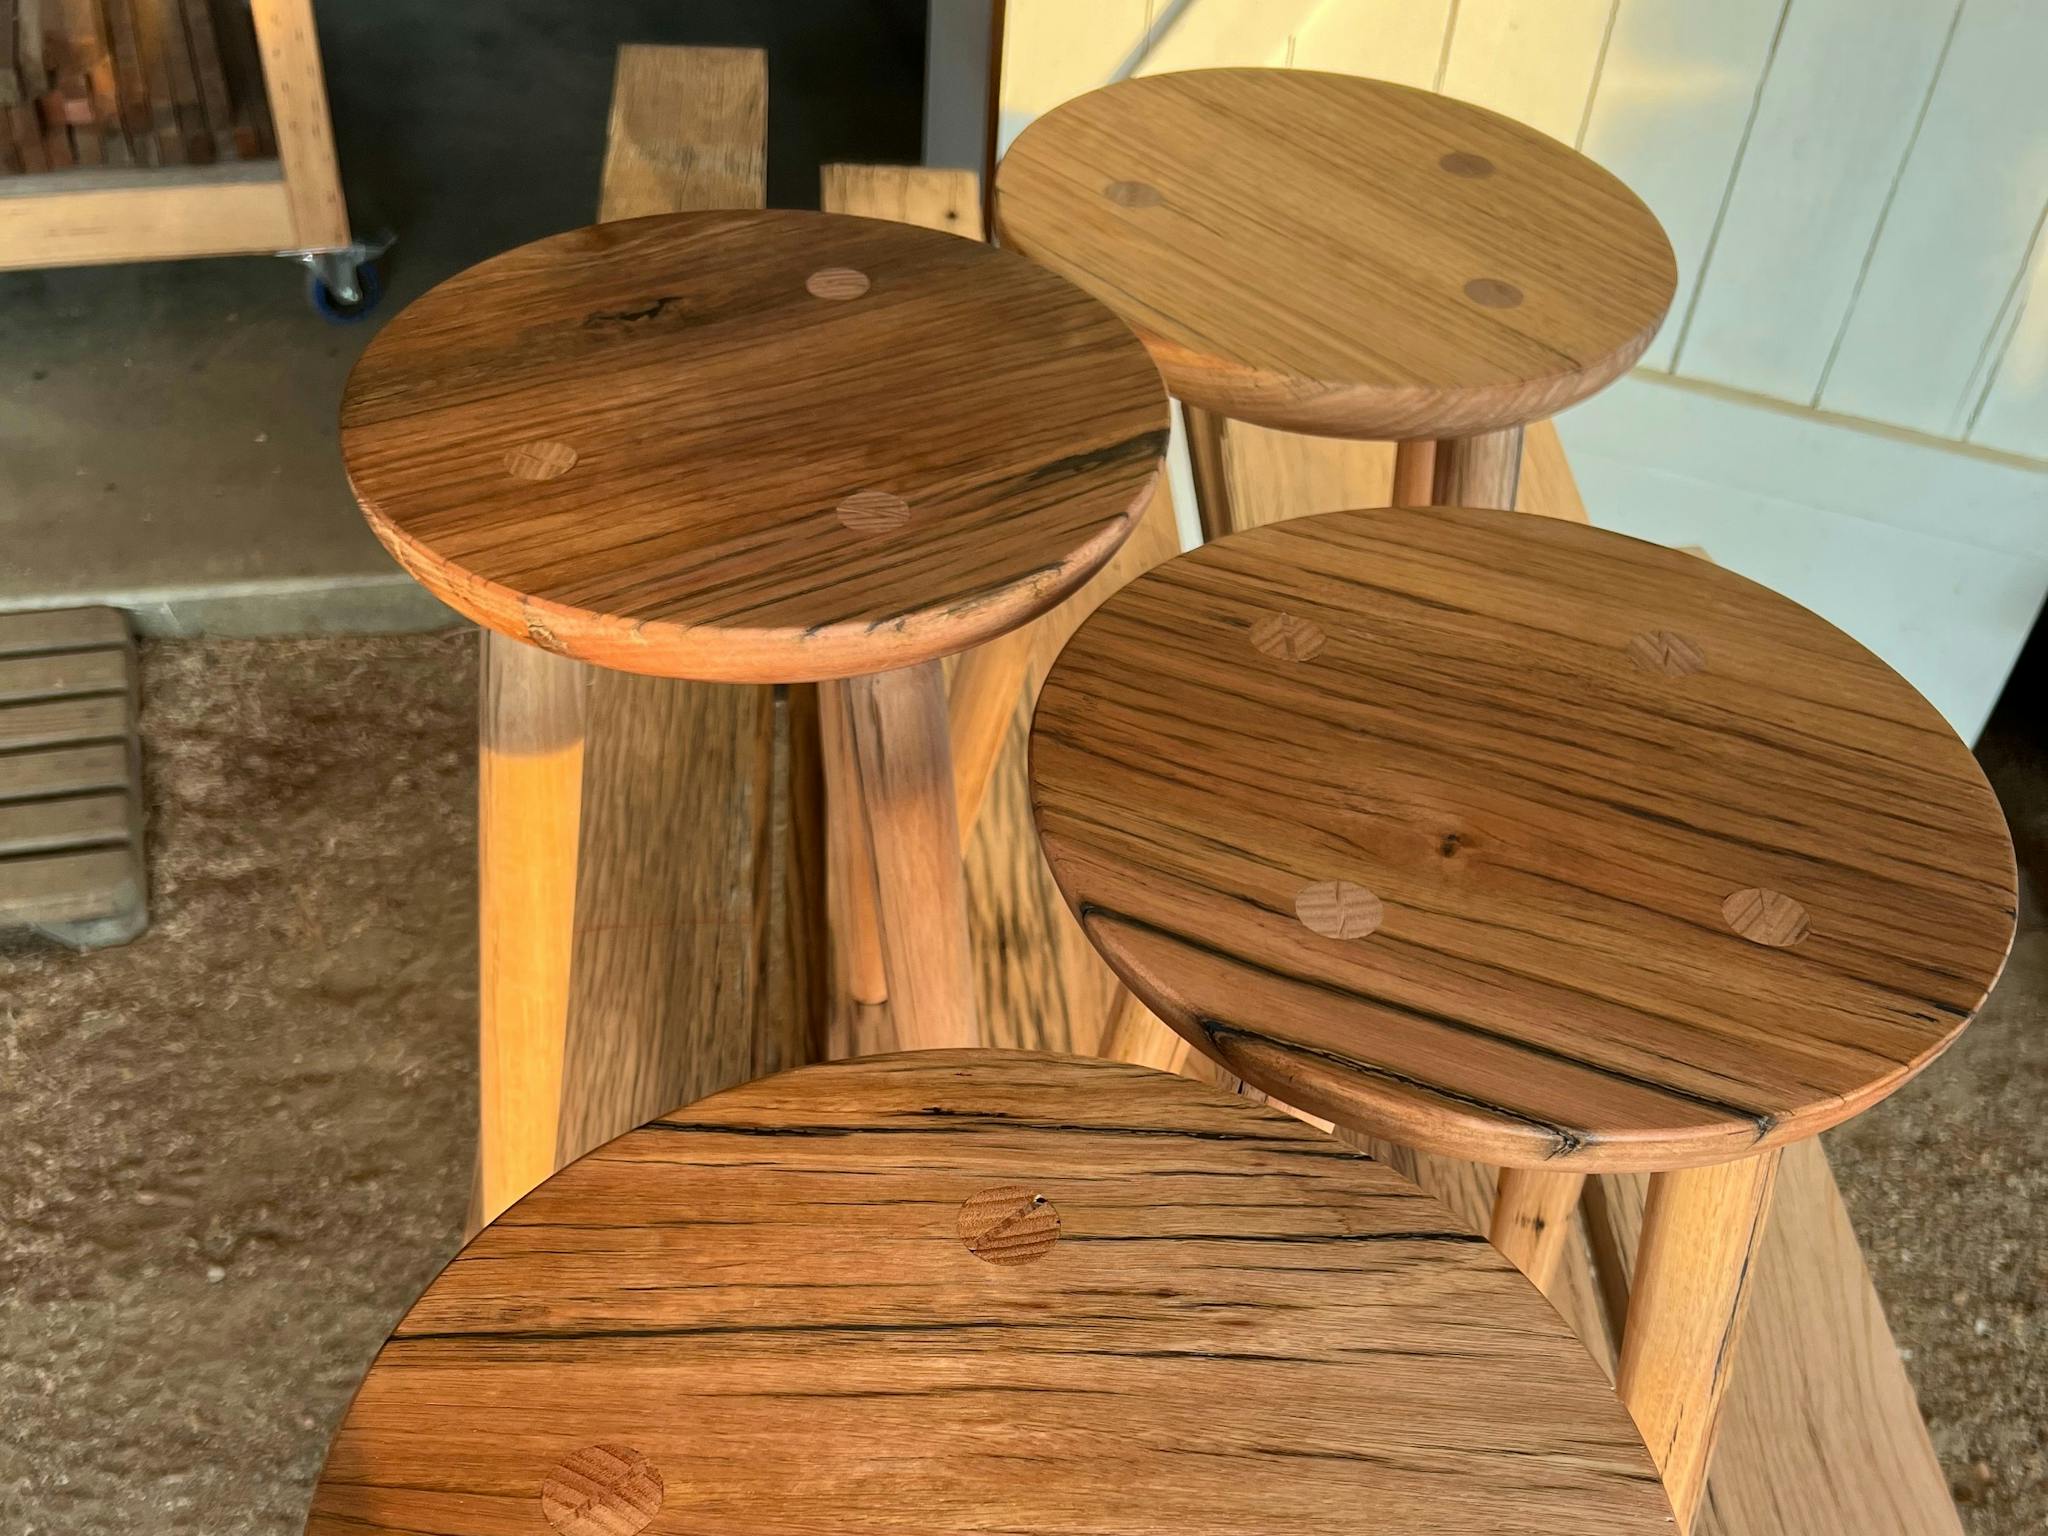 Three tops of recycled timber stools.